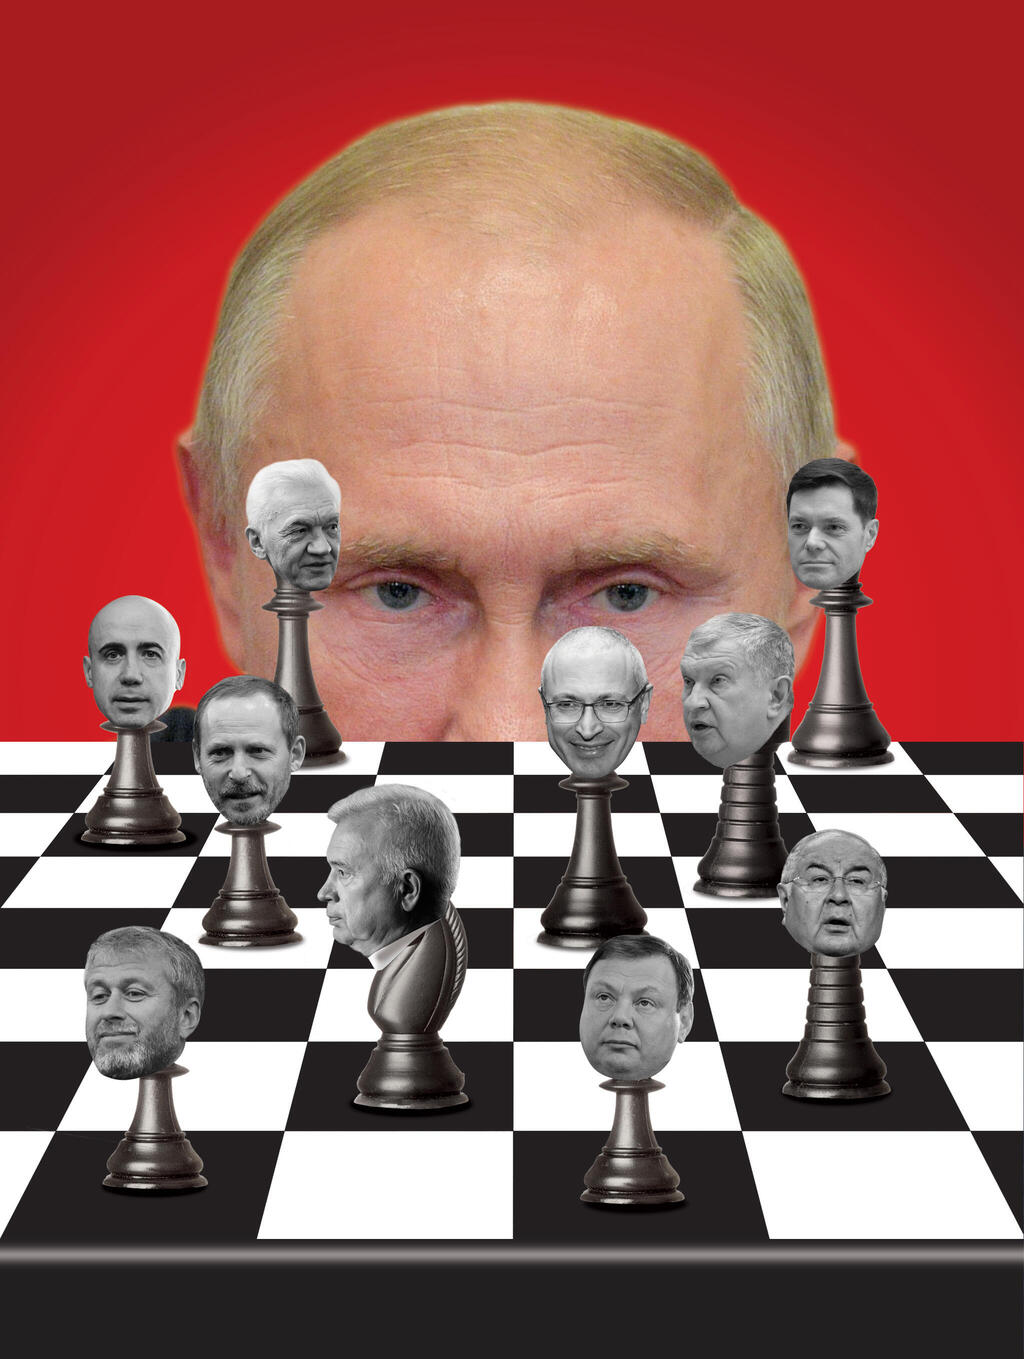 Secrets of the Russian Chess Masters: Beyond the Basics